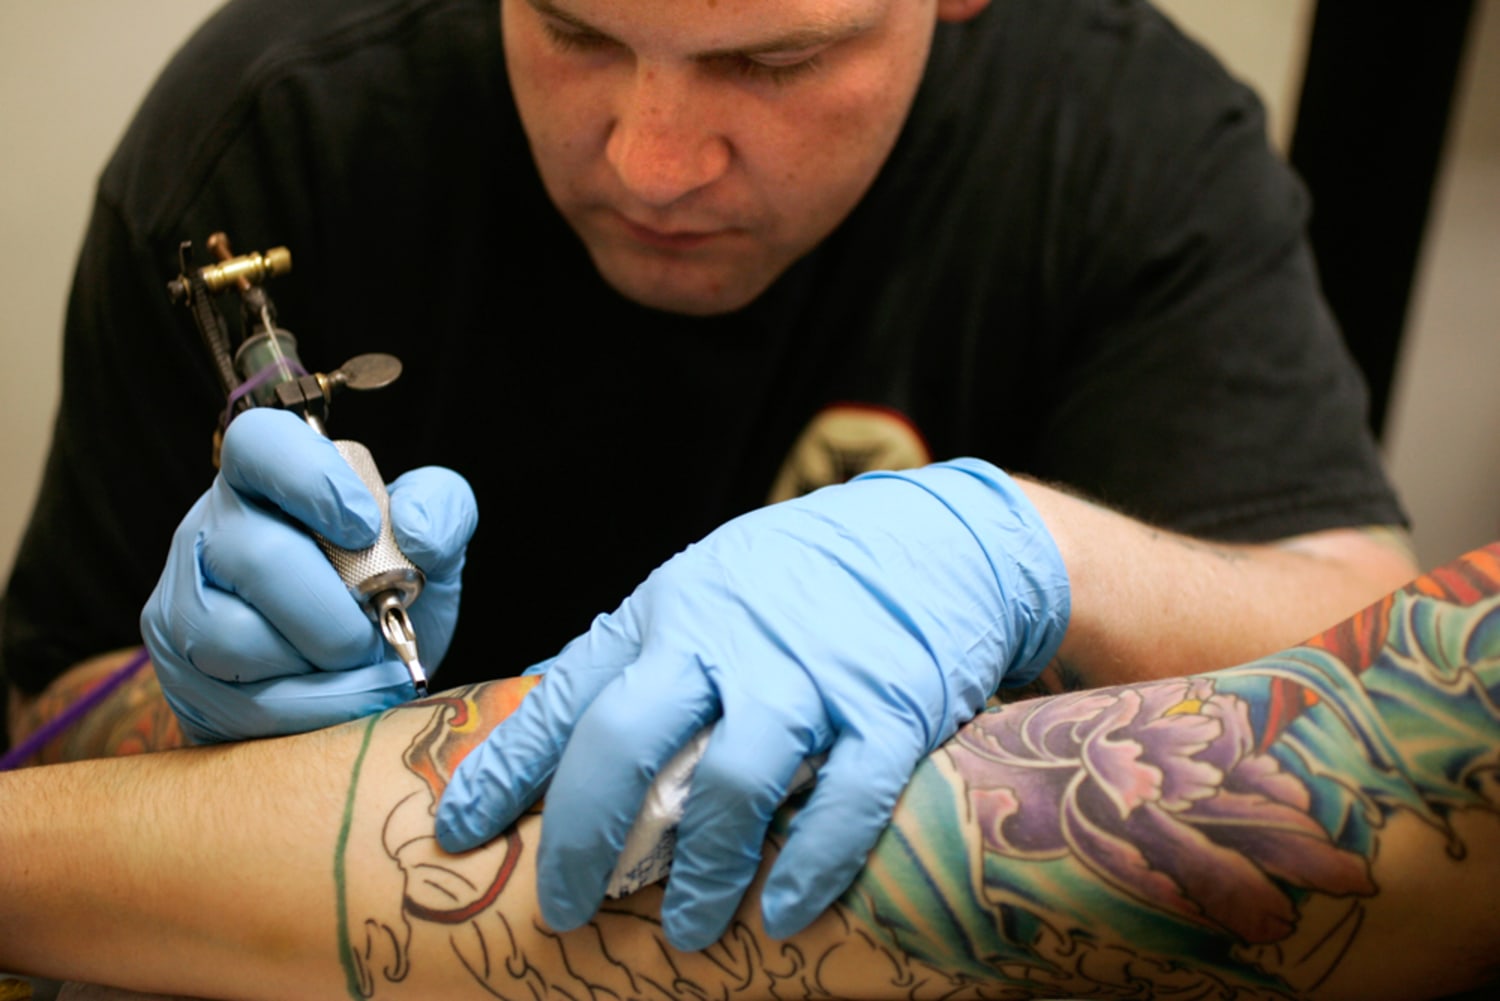 Tattoos now part of mainstream culture